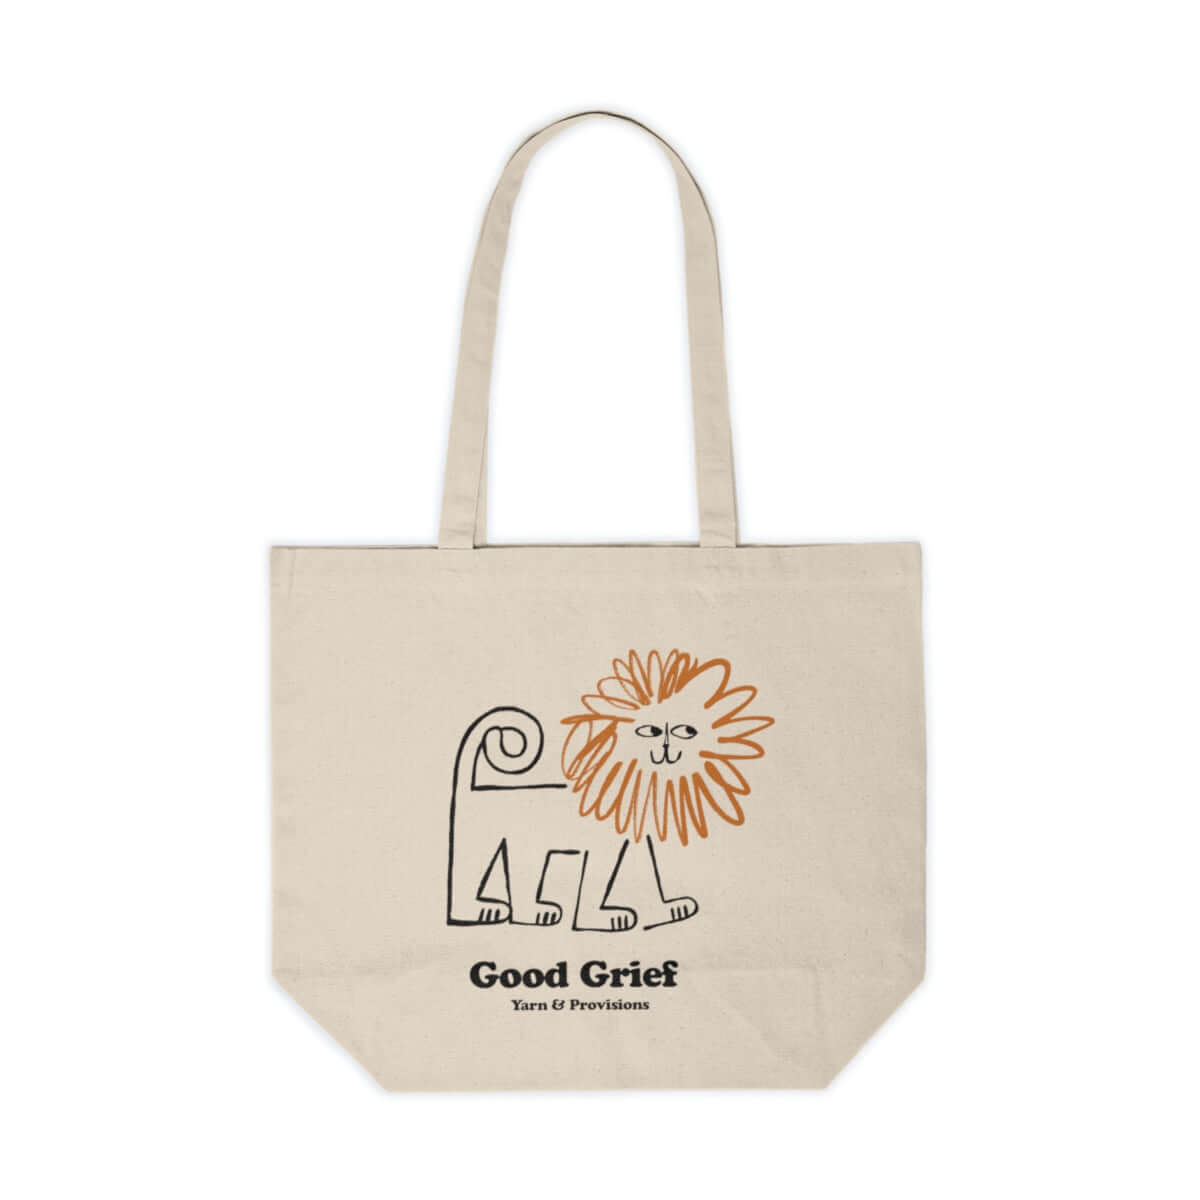 Good Grief Tote Bag – Good Grief Yarn & Provisions